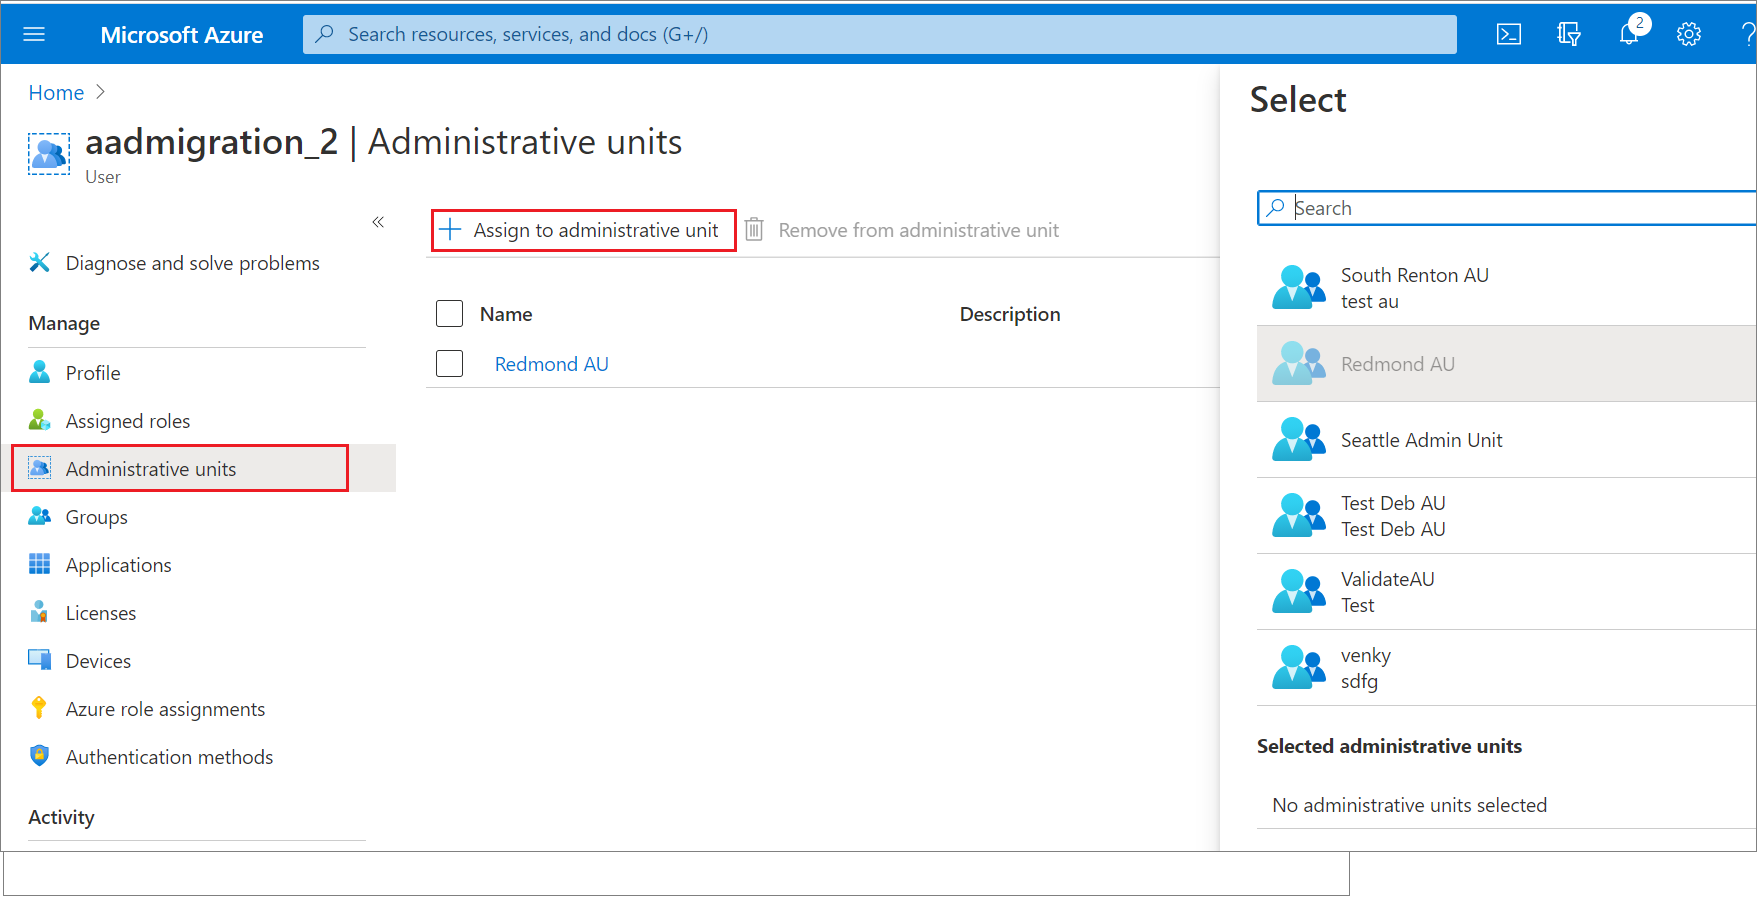 Screenshot of the "Administrative units" pane for assigning a user to an administrative unit.